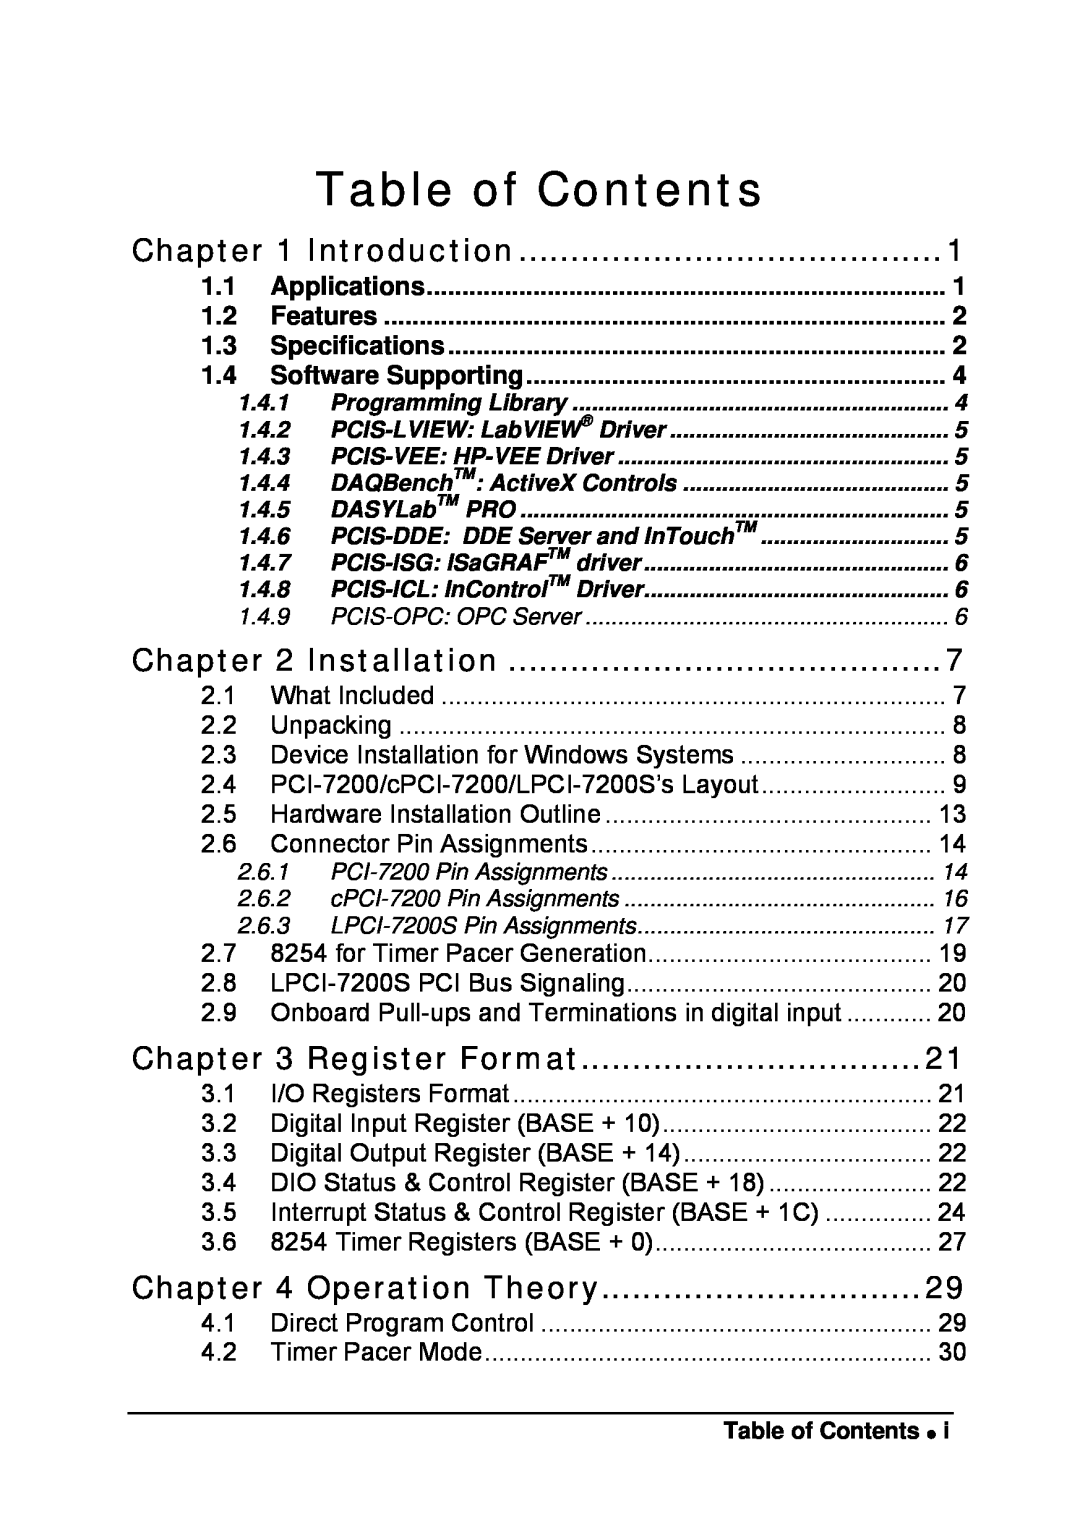 Intel LPCI-7200S manual Table of Contents, Introduction, Installation, Register Format, Operation Theory 